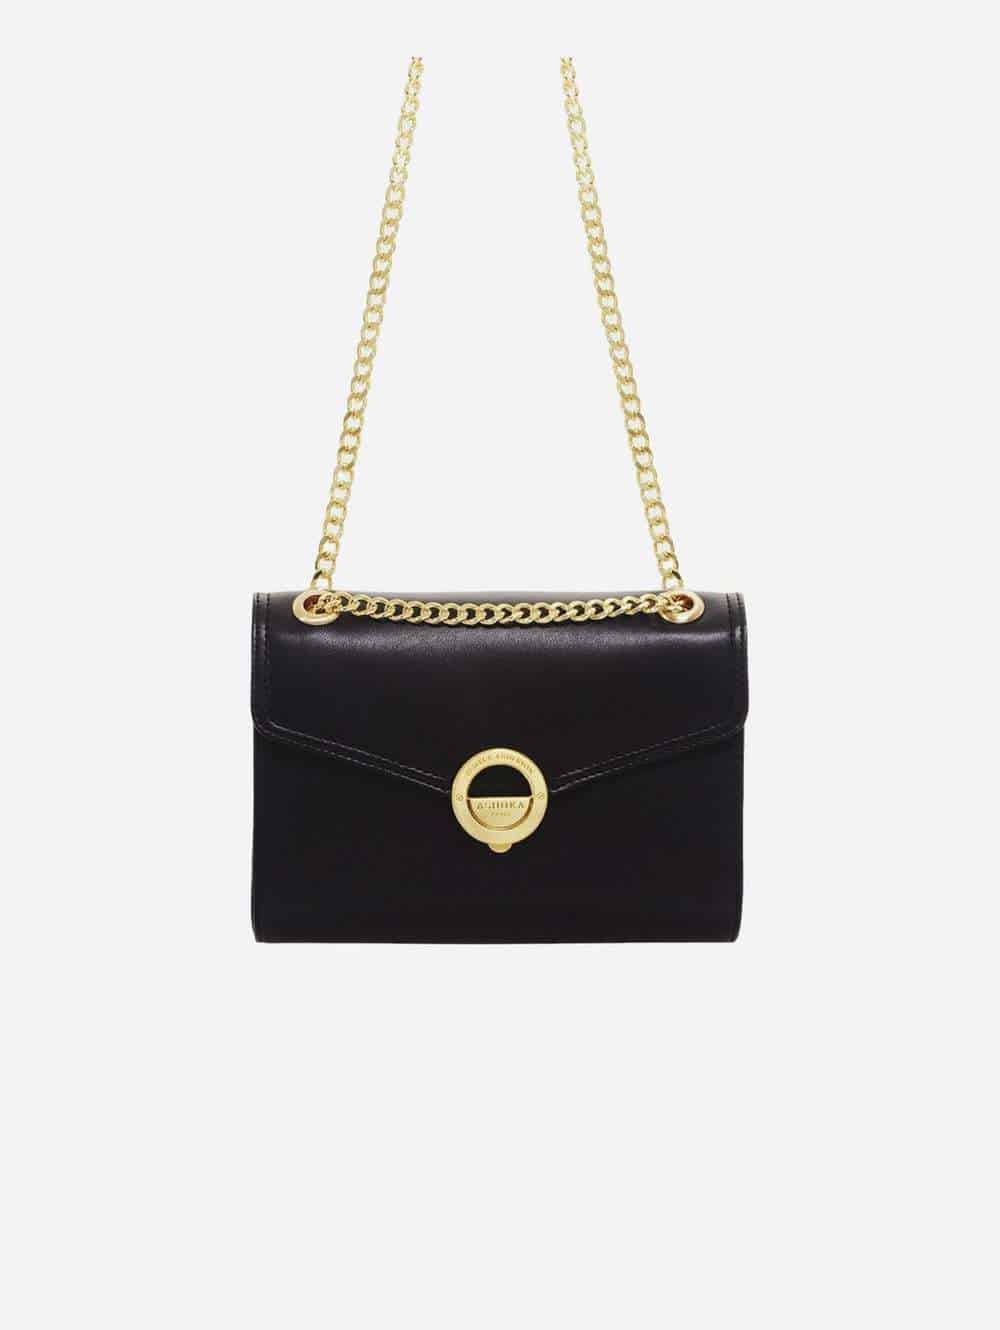 black bag with gold clasp and gold chain strap from ashoka paris vegan bags crossbody collection